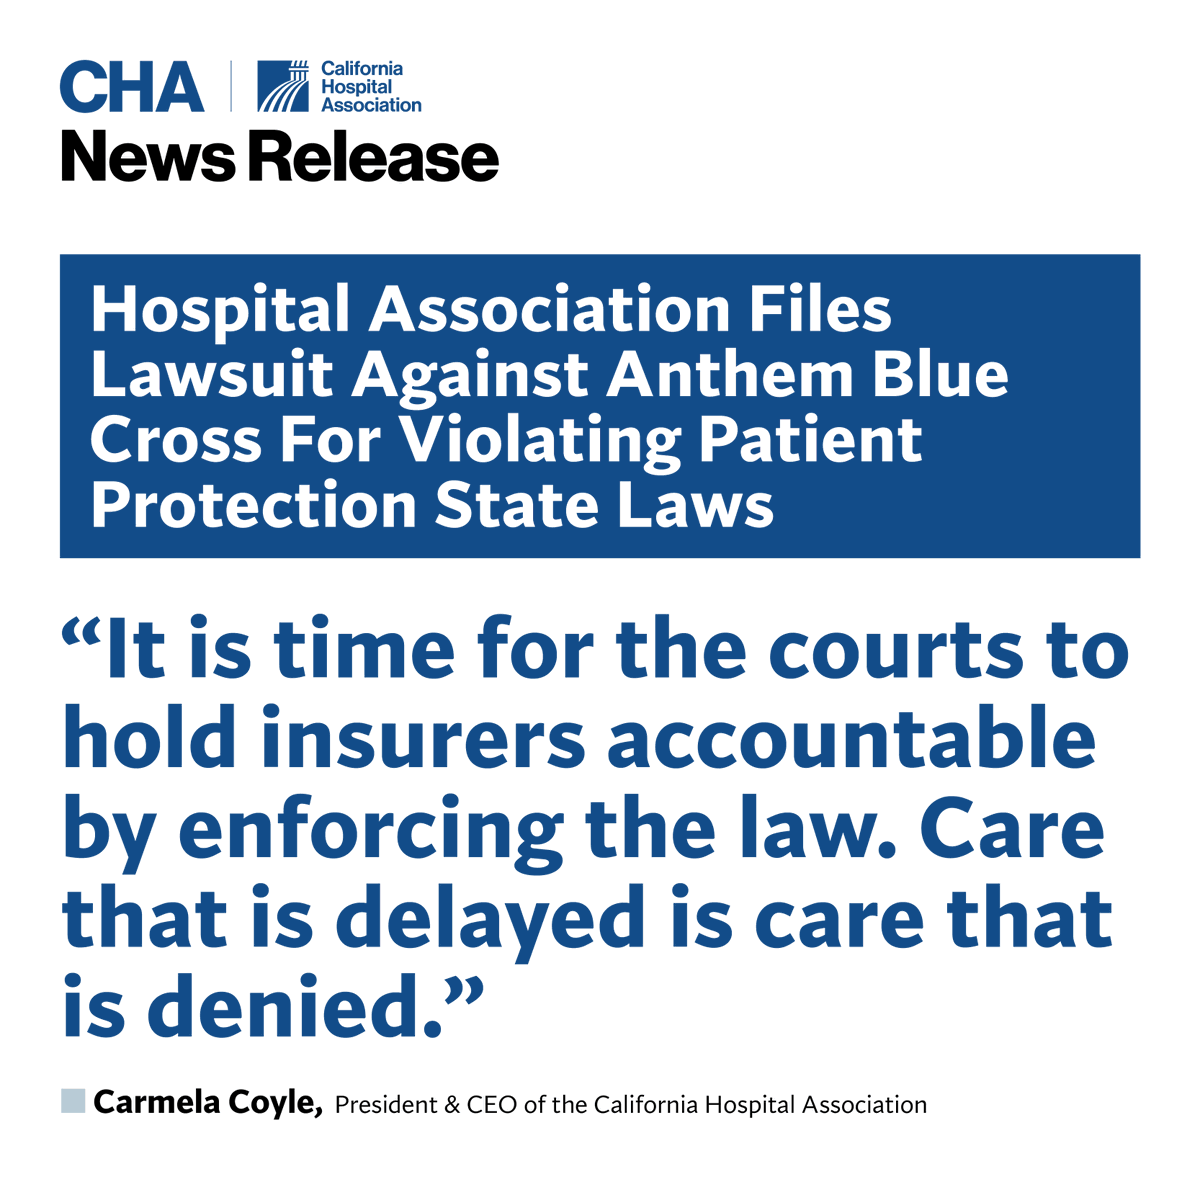 As insurance companies that prioritize profits over patients continue to violate California’s patient protection laws, CHA has filed a lawsuit asking the courts to step in on patients’ behalf. Read more about our work to #HoldInsurersAccountable in today’s news release: